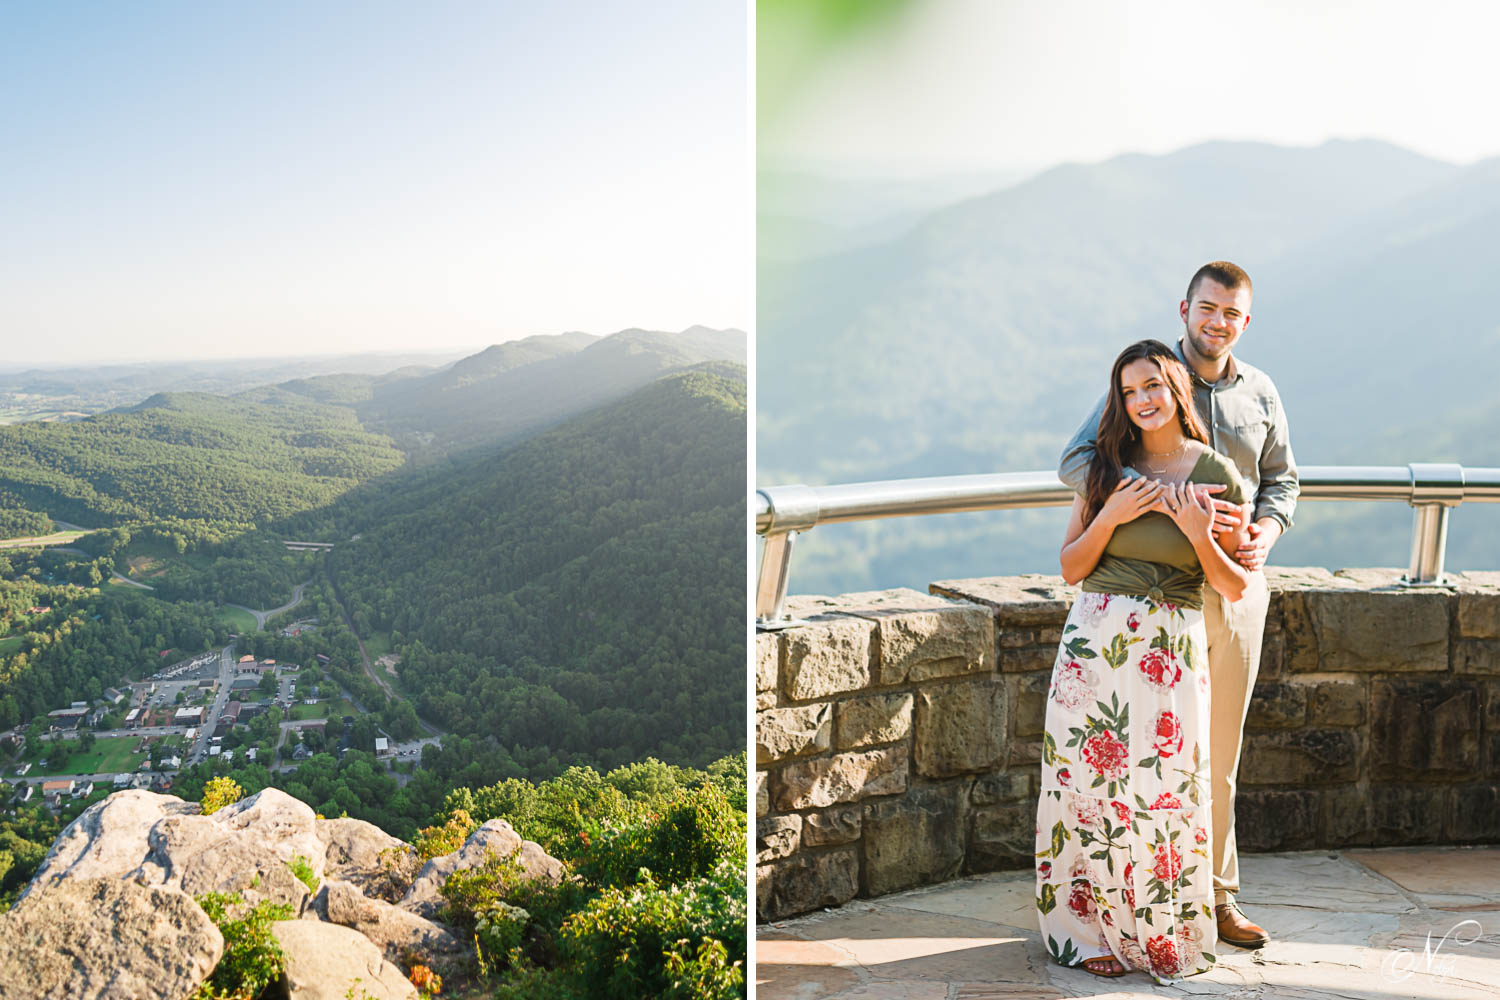 The mountain views, rock outcroppings and whole town of Cumberland Gap seen from above at the Pinacle overlook. And a couple enjoying the view at sunset